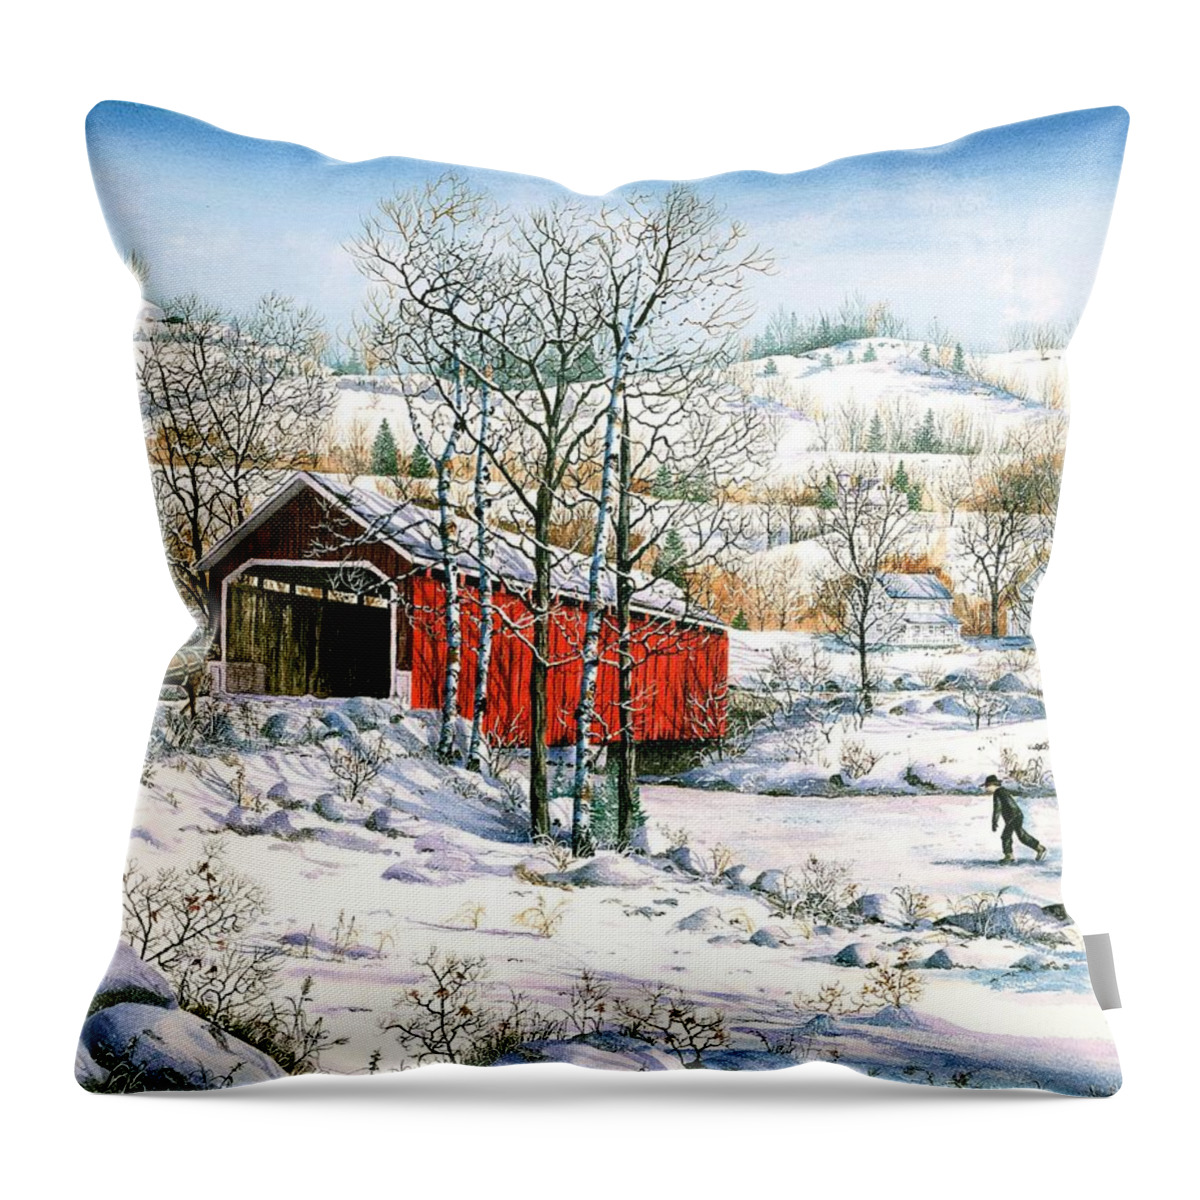 Covered Bridge Throw Pillow featuring the painting Winter Crossing by Diane Phalen